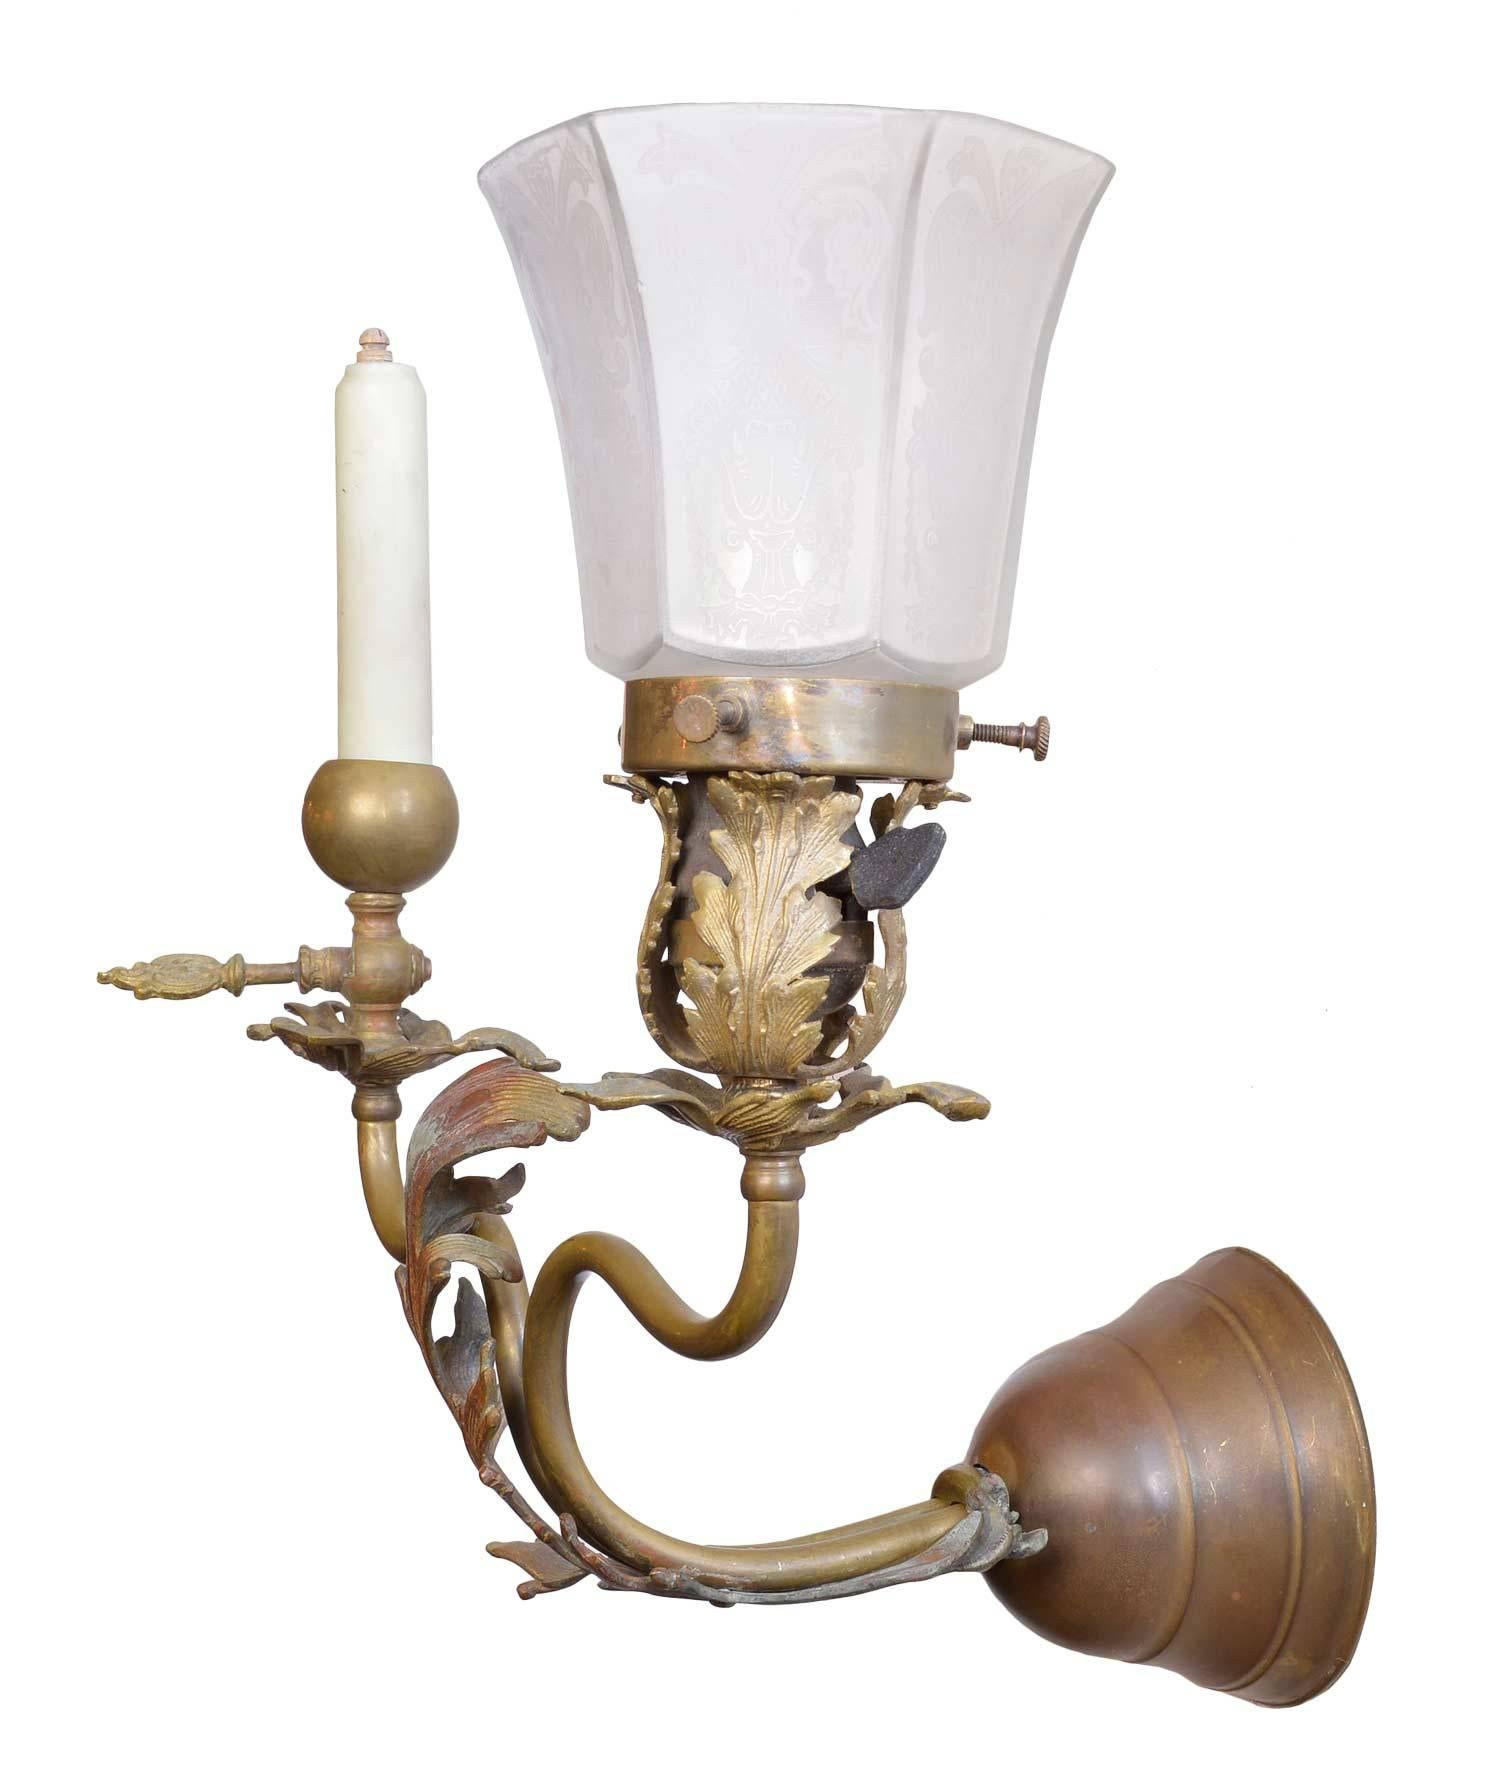 Cast leaves adorn this smart looking sconce from the turn of the century. The fixture is completely original with etched glass shade, glass candle cover, cast leaf details, rich brass patina, Hubbell socket and ornate gas key. 

We find that early